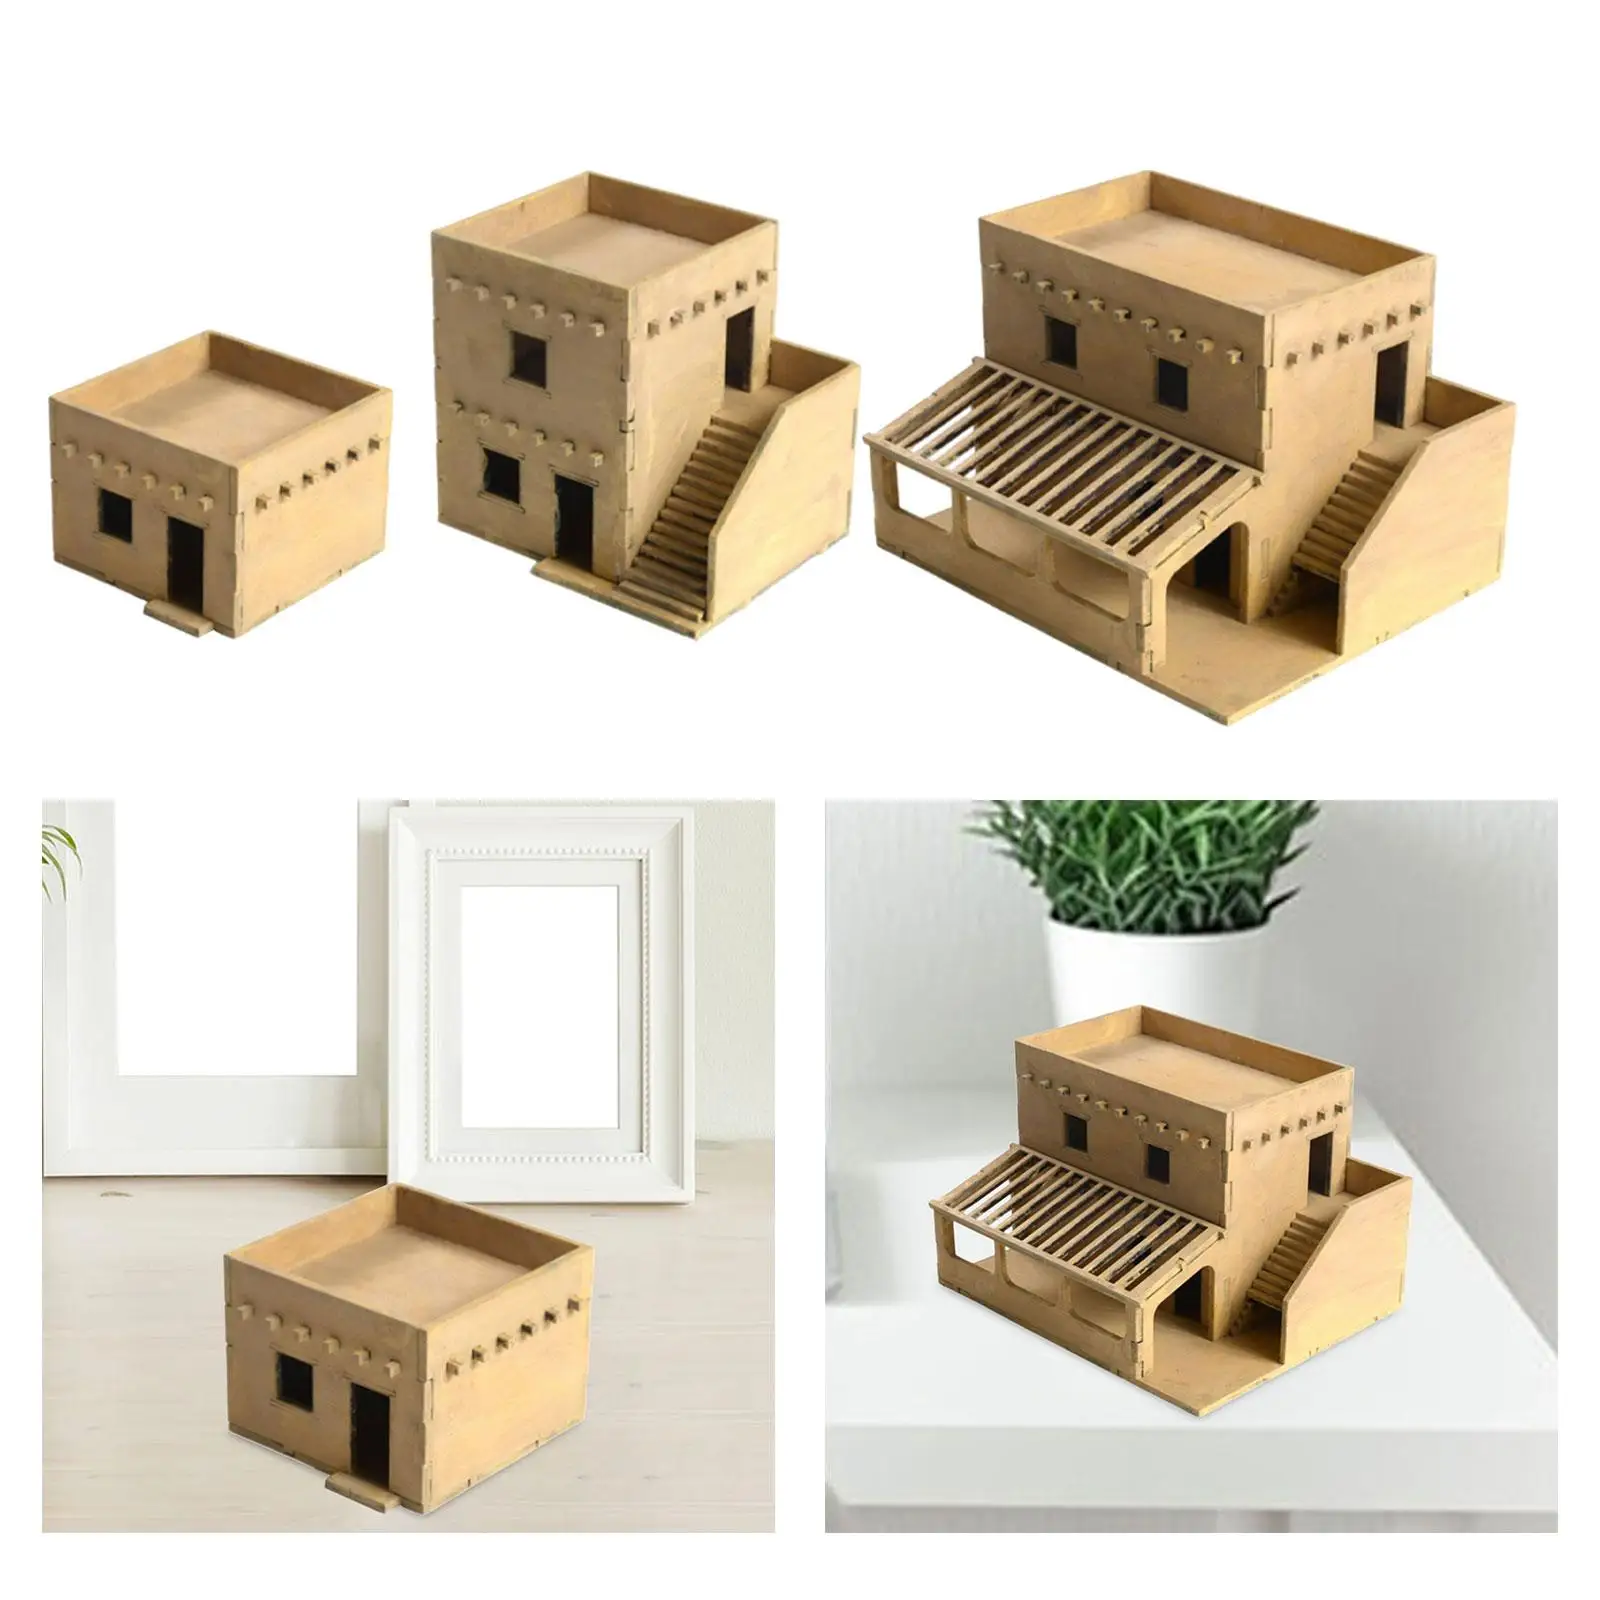 1/72 Miniature Wooden House Educational Learning Toy Layout Scenery for Sand Table Model Railway Micro Landscape Decor Accessory